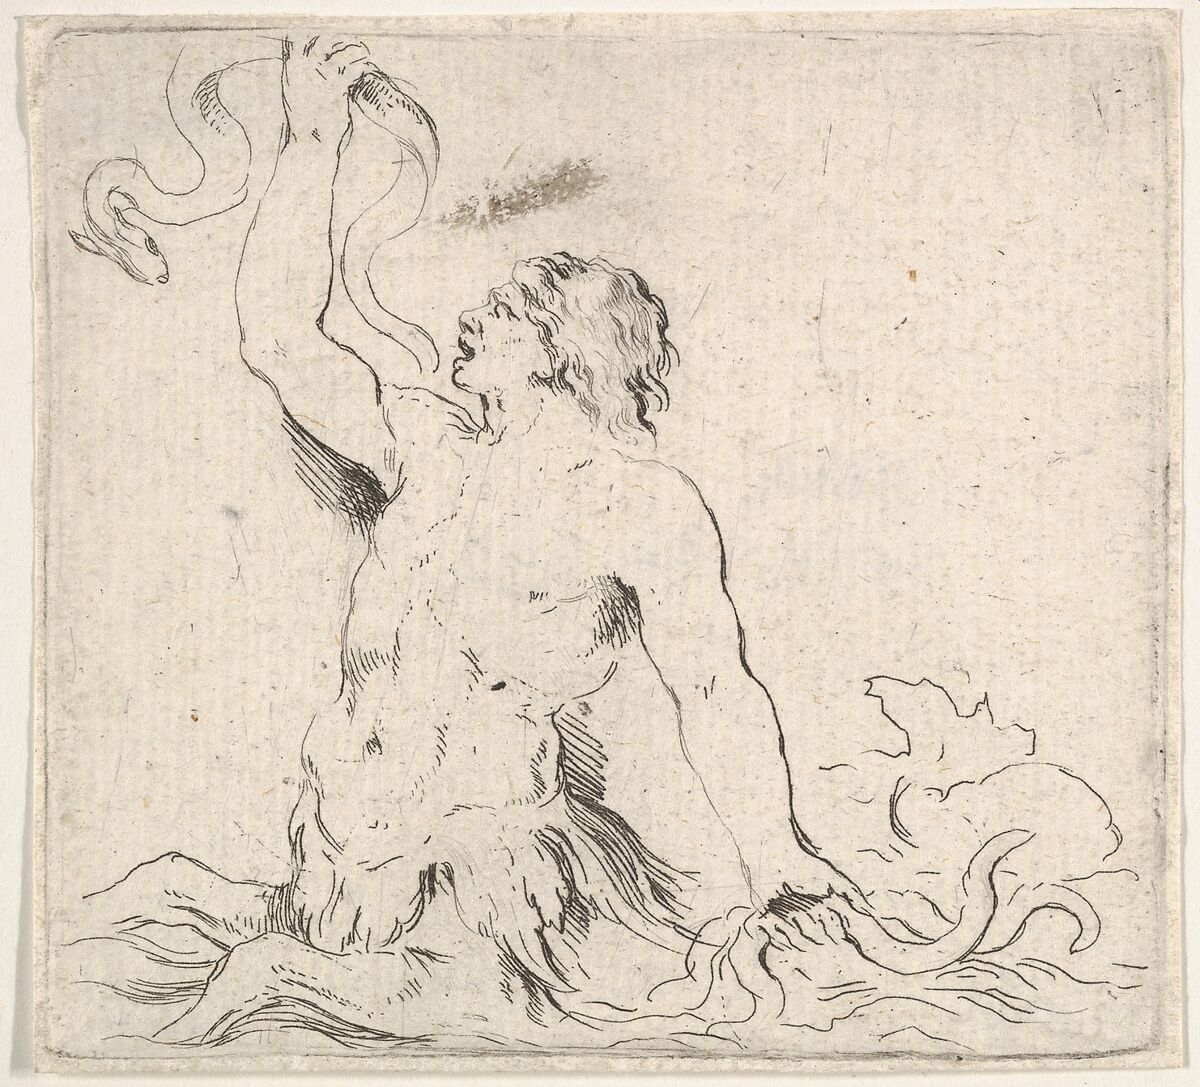 Plate 7: a triton in the water, facing left, holding up an eel in his right hand and two other eels underwater in his left hand, from 'Second collection of various doodles and etching proofs' (Second recueil de divers griffonnements et preuves d'eauforte), Stefano della Bella (Italian, Florence 1610–1664 Florence), Etching 